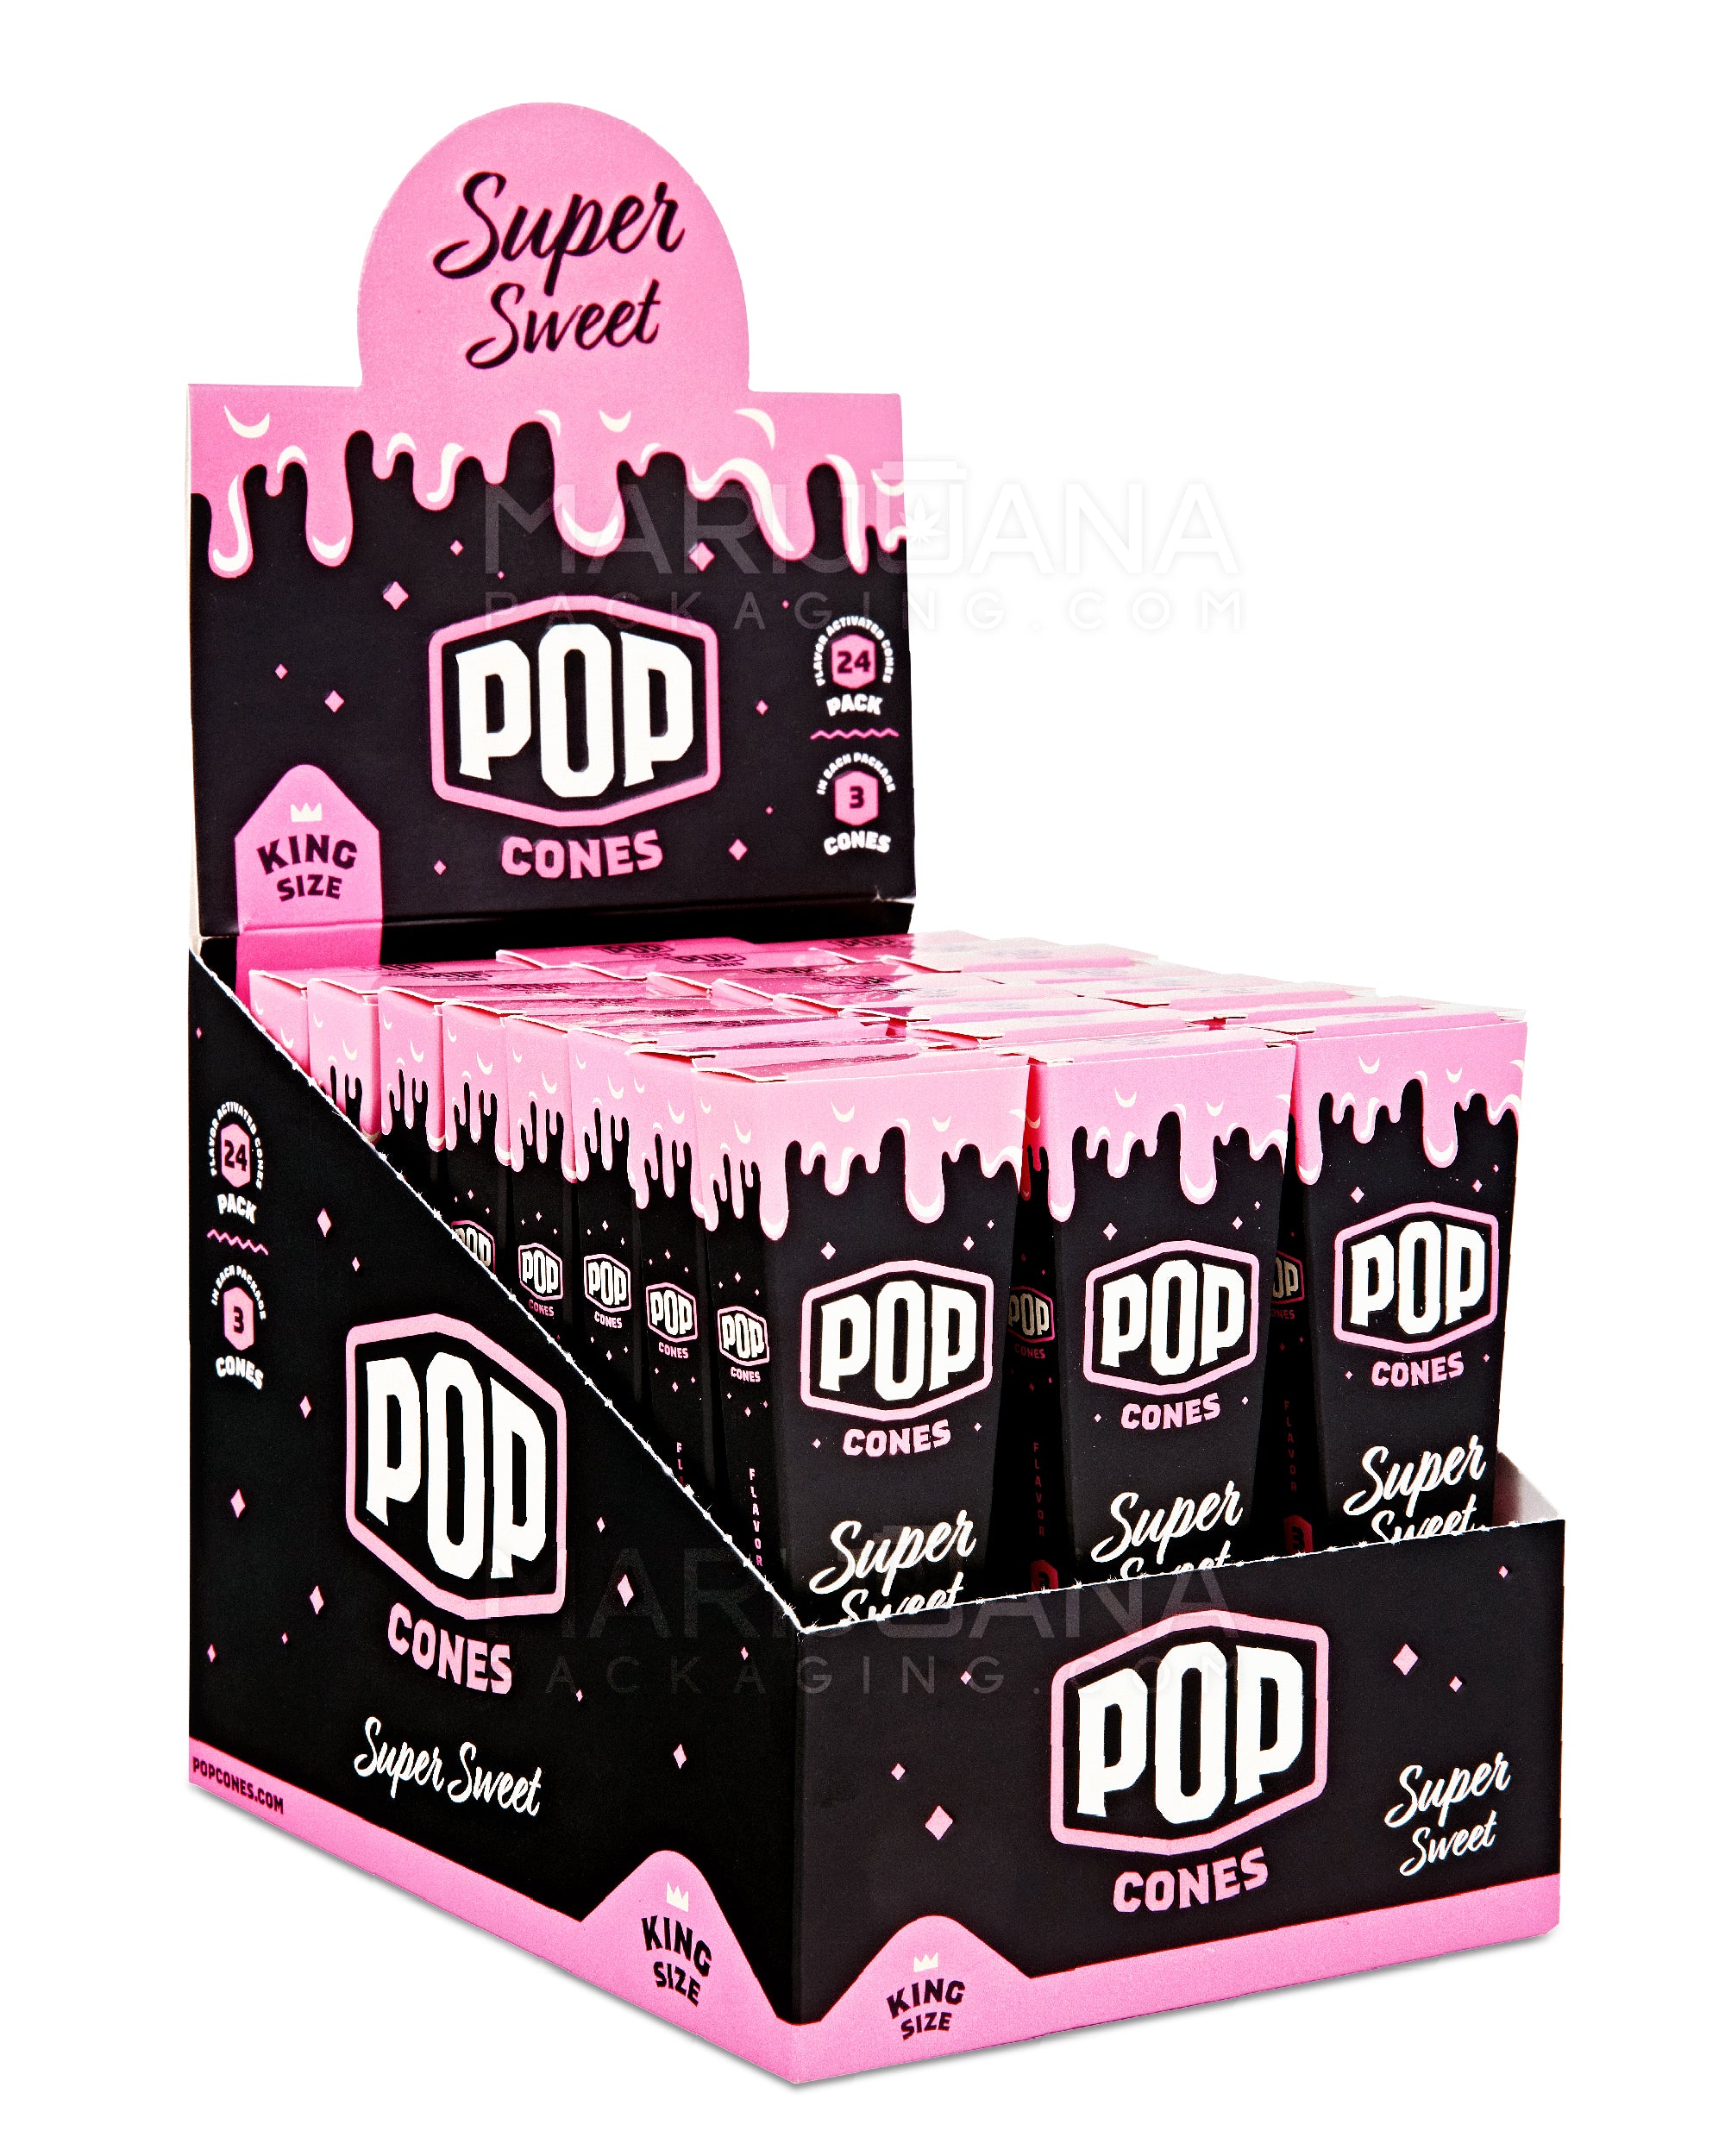 POP CONES | 'Retail Display' King Size Pre-Rolled Cones | 109mm - Super Sweet - 24 Count - 1